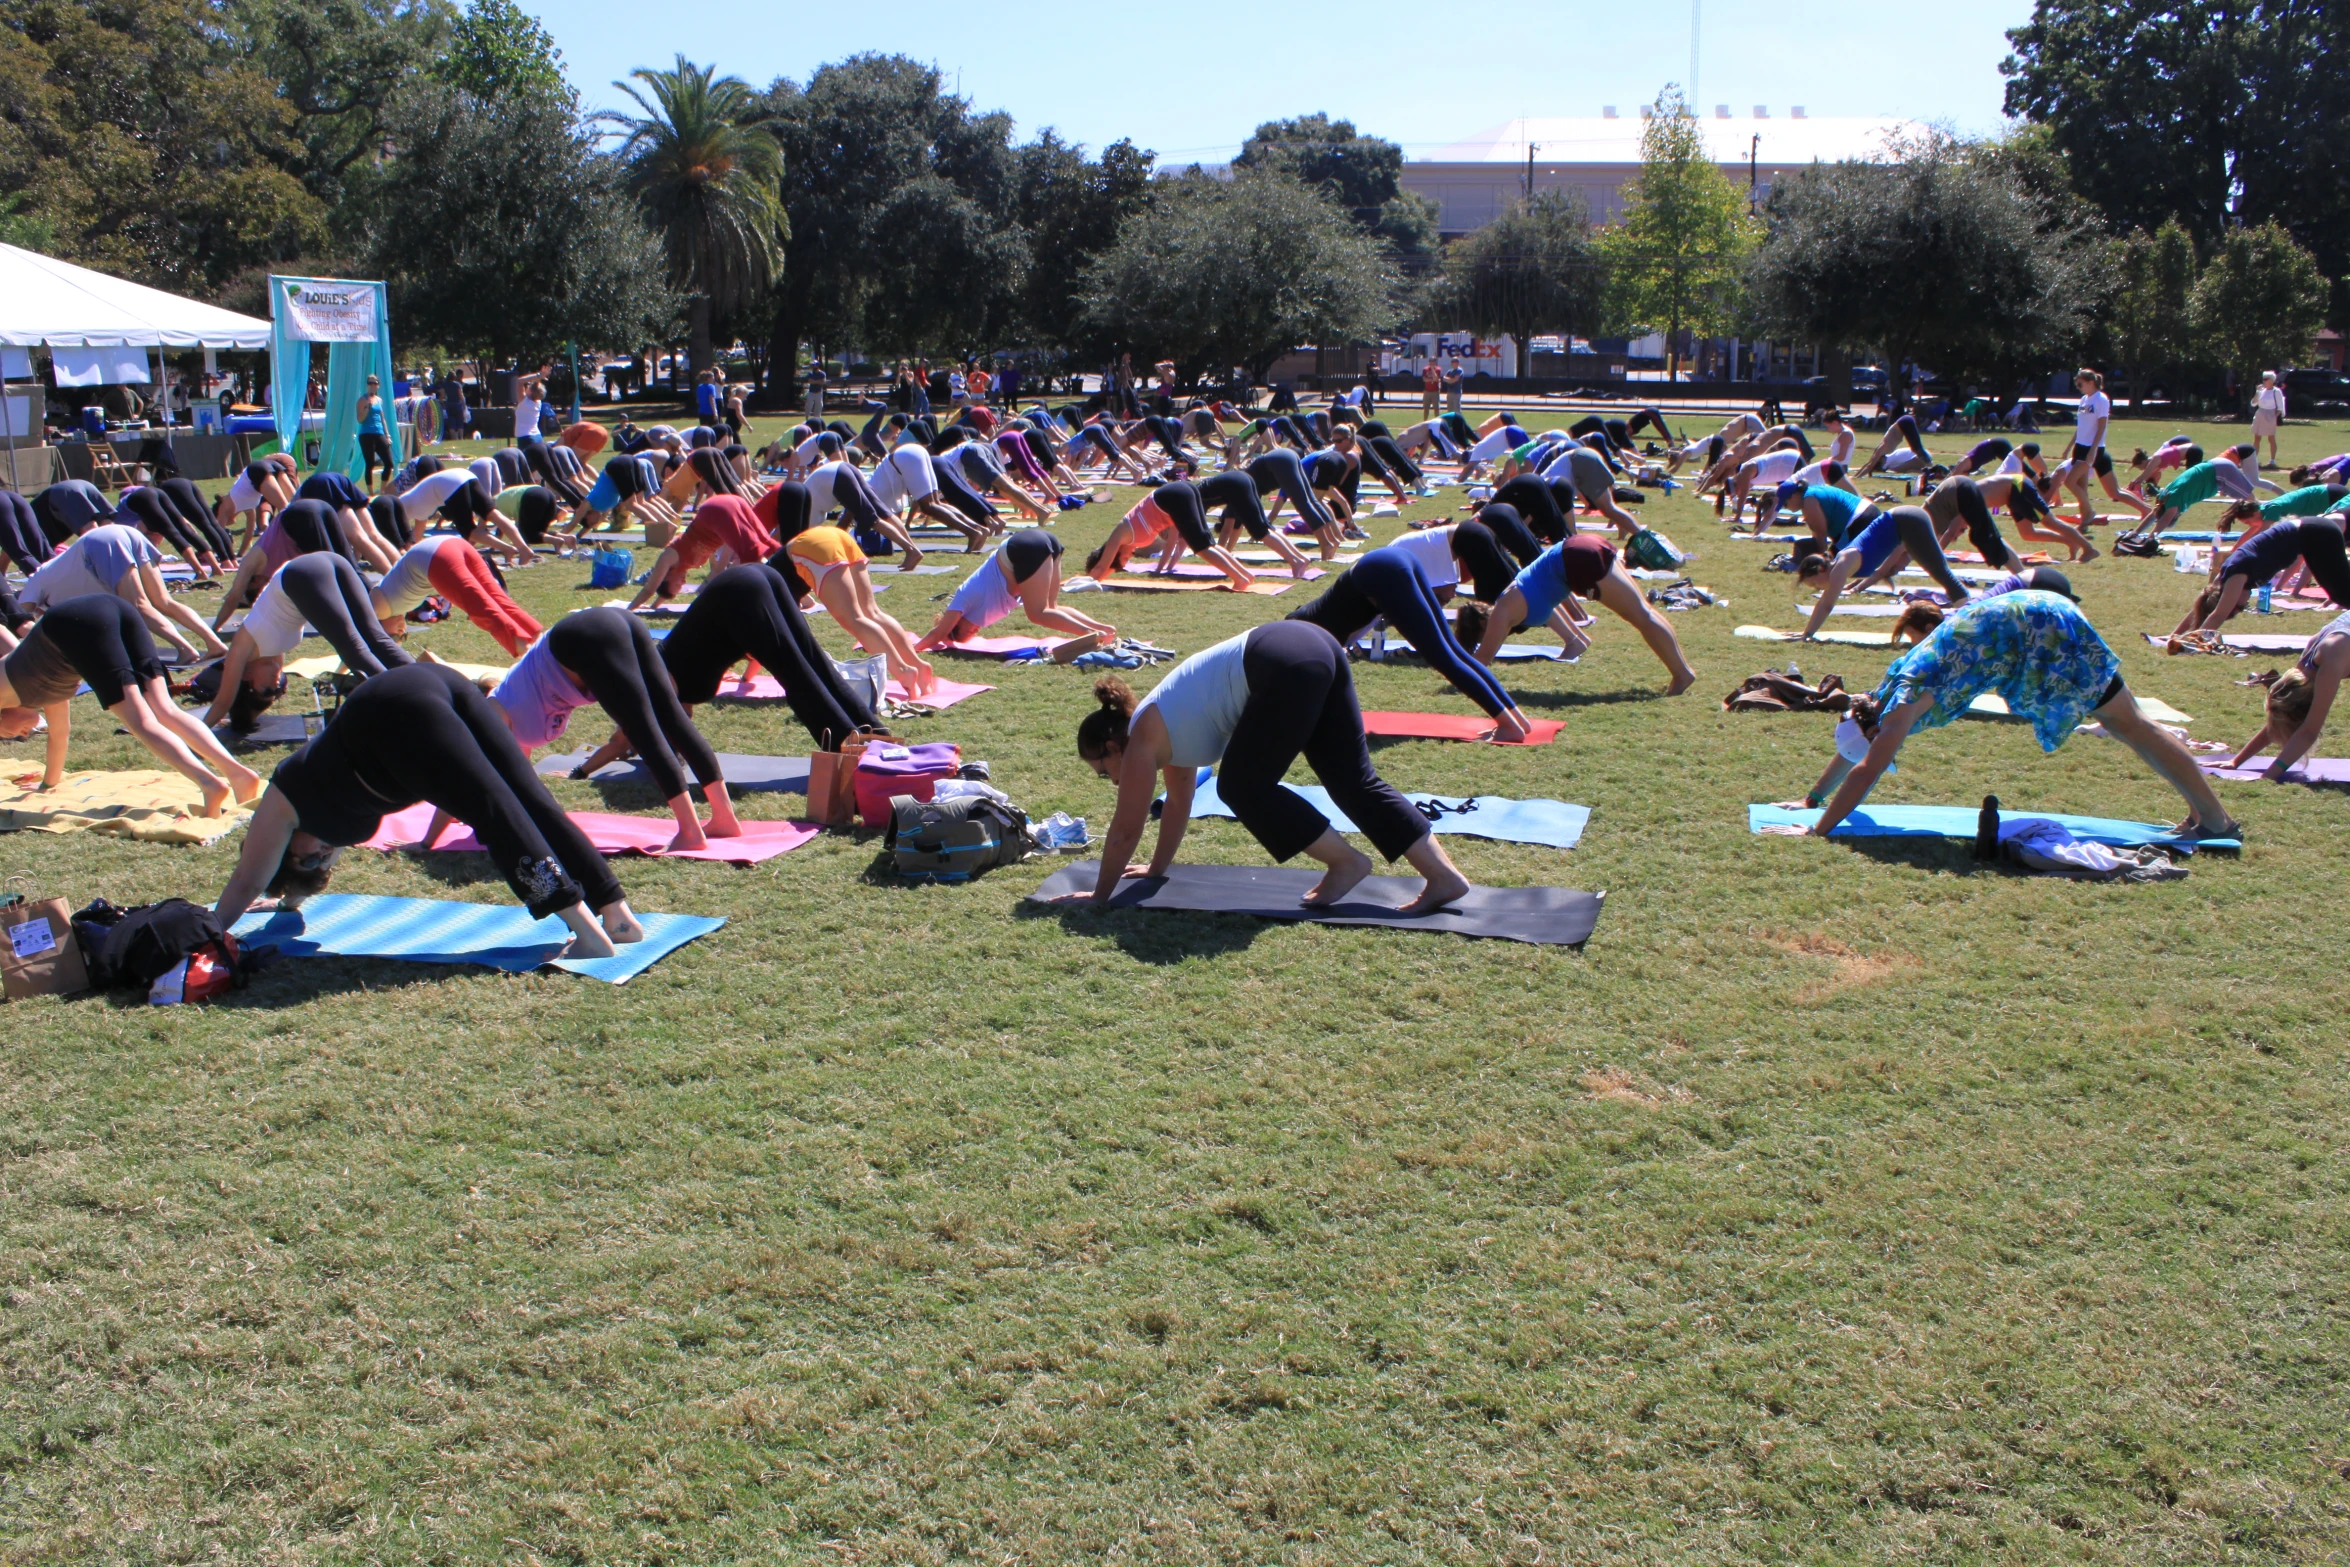 a group of people practicing yoga outdoors on blue and pink yoga mats